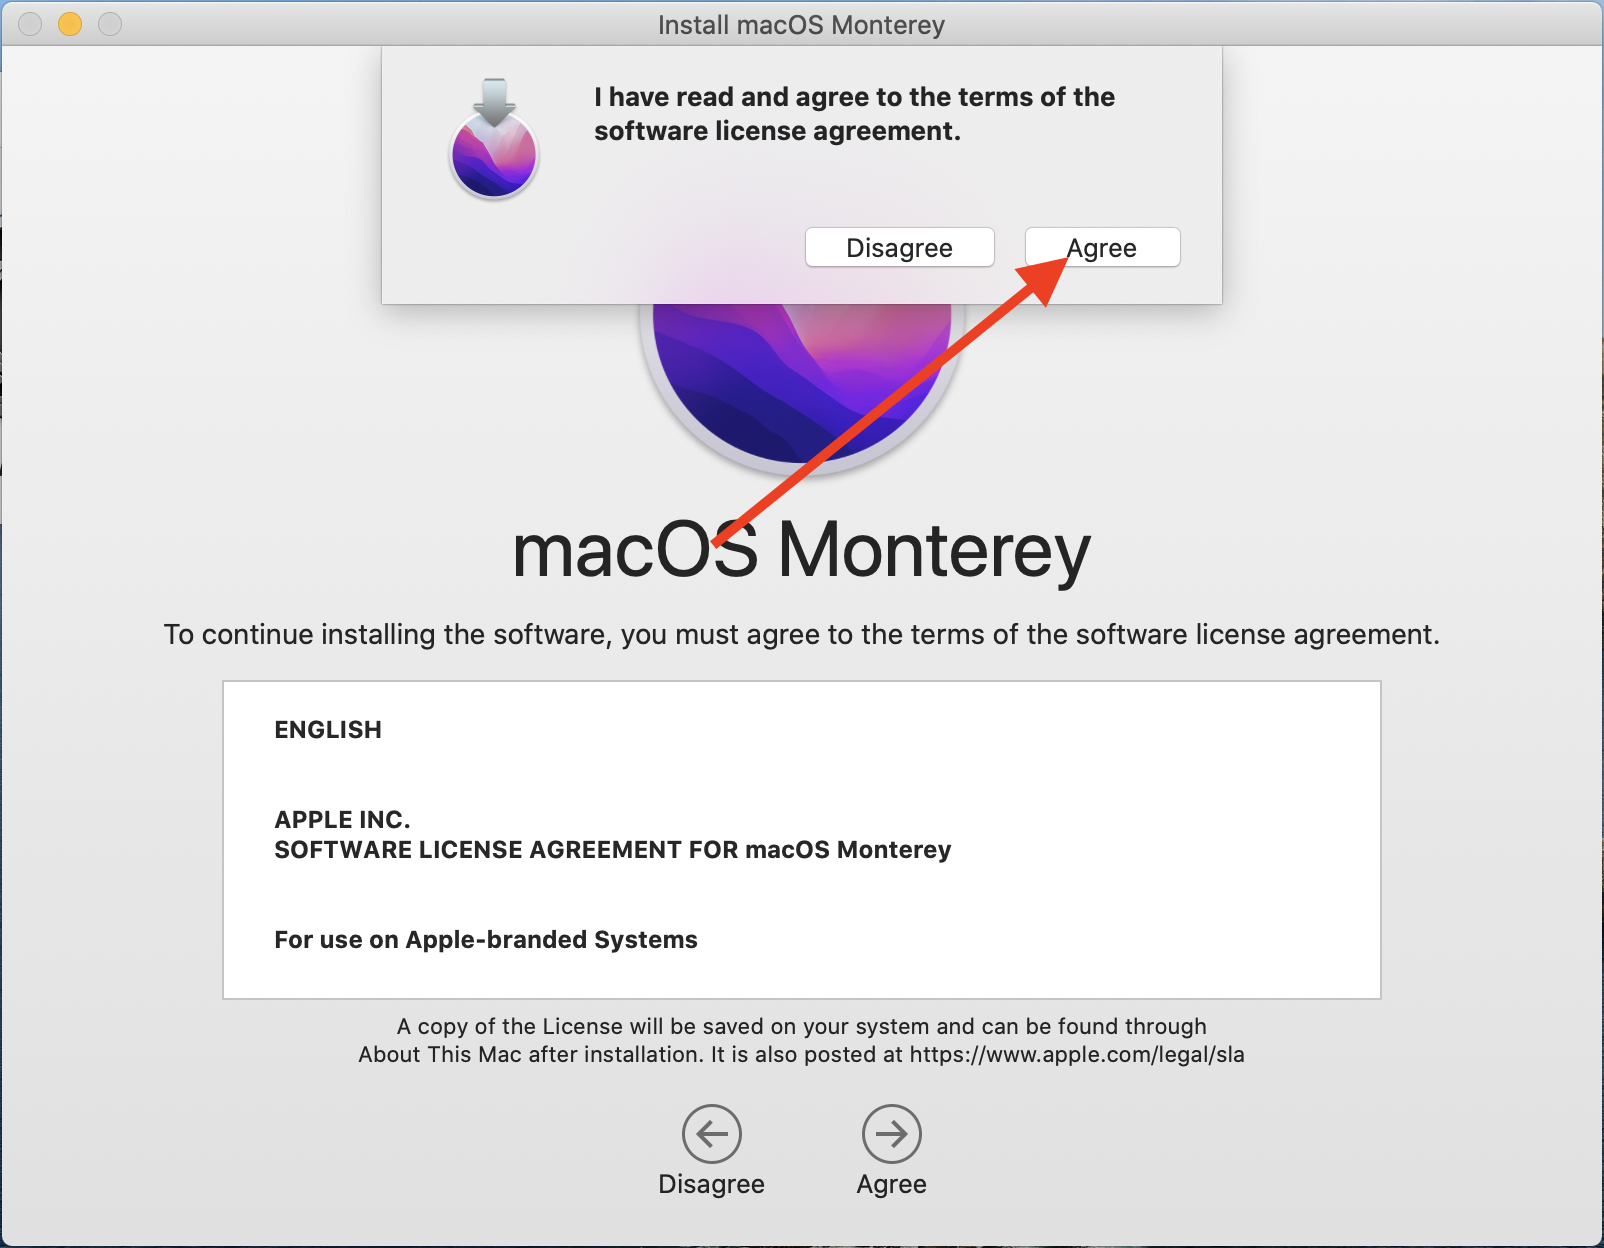 macos terms agreement 2